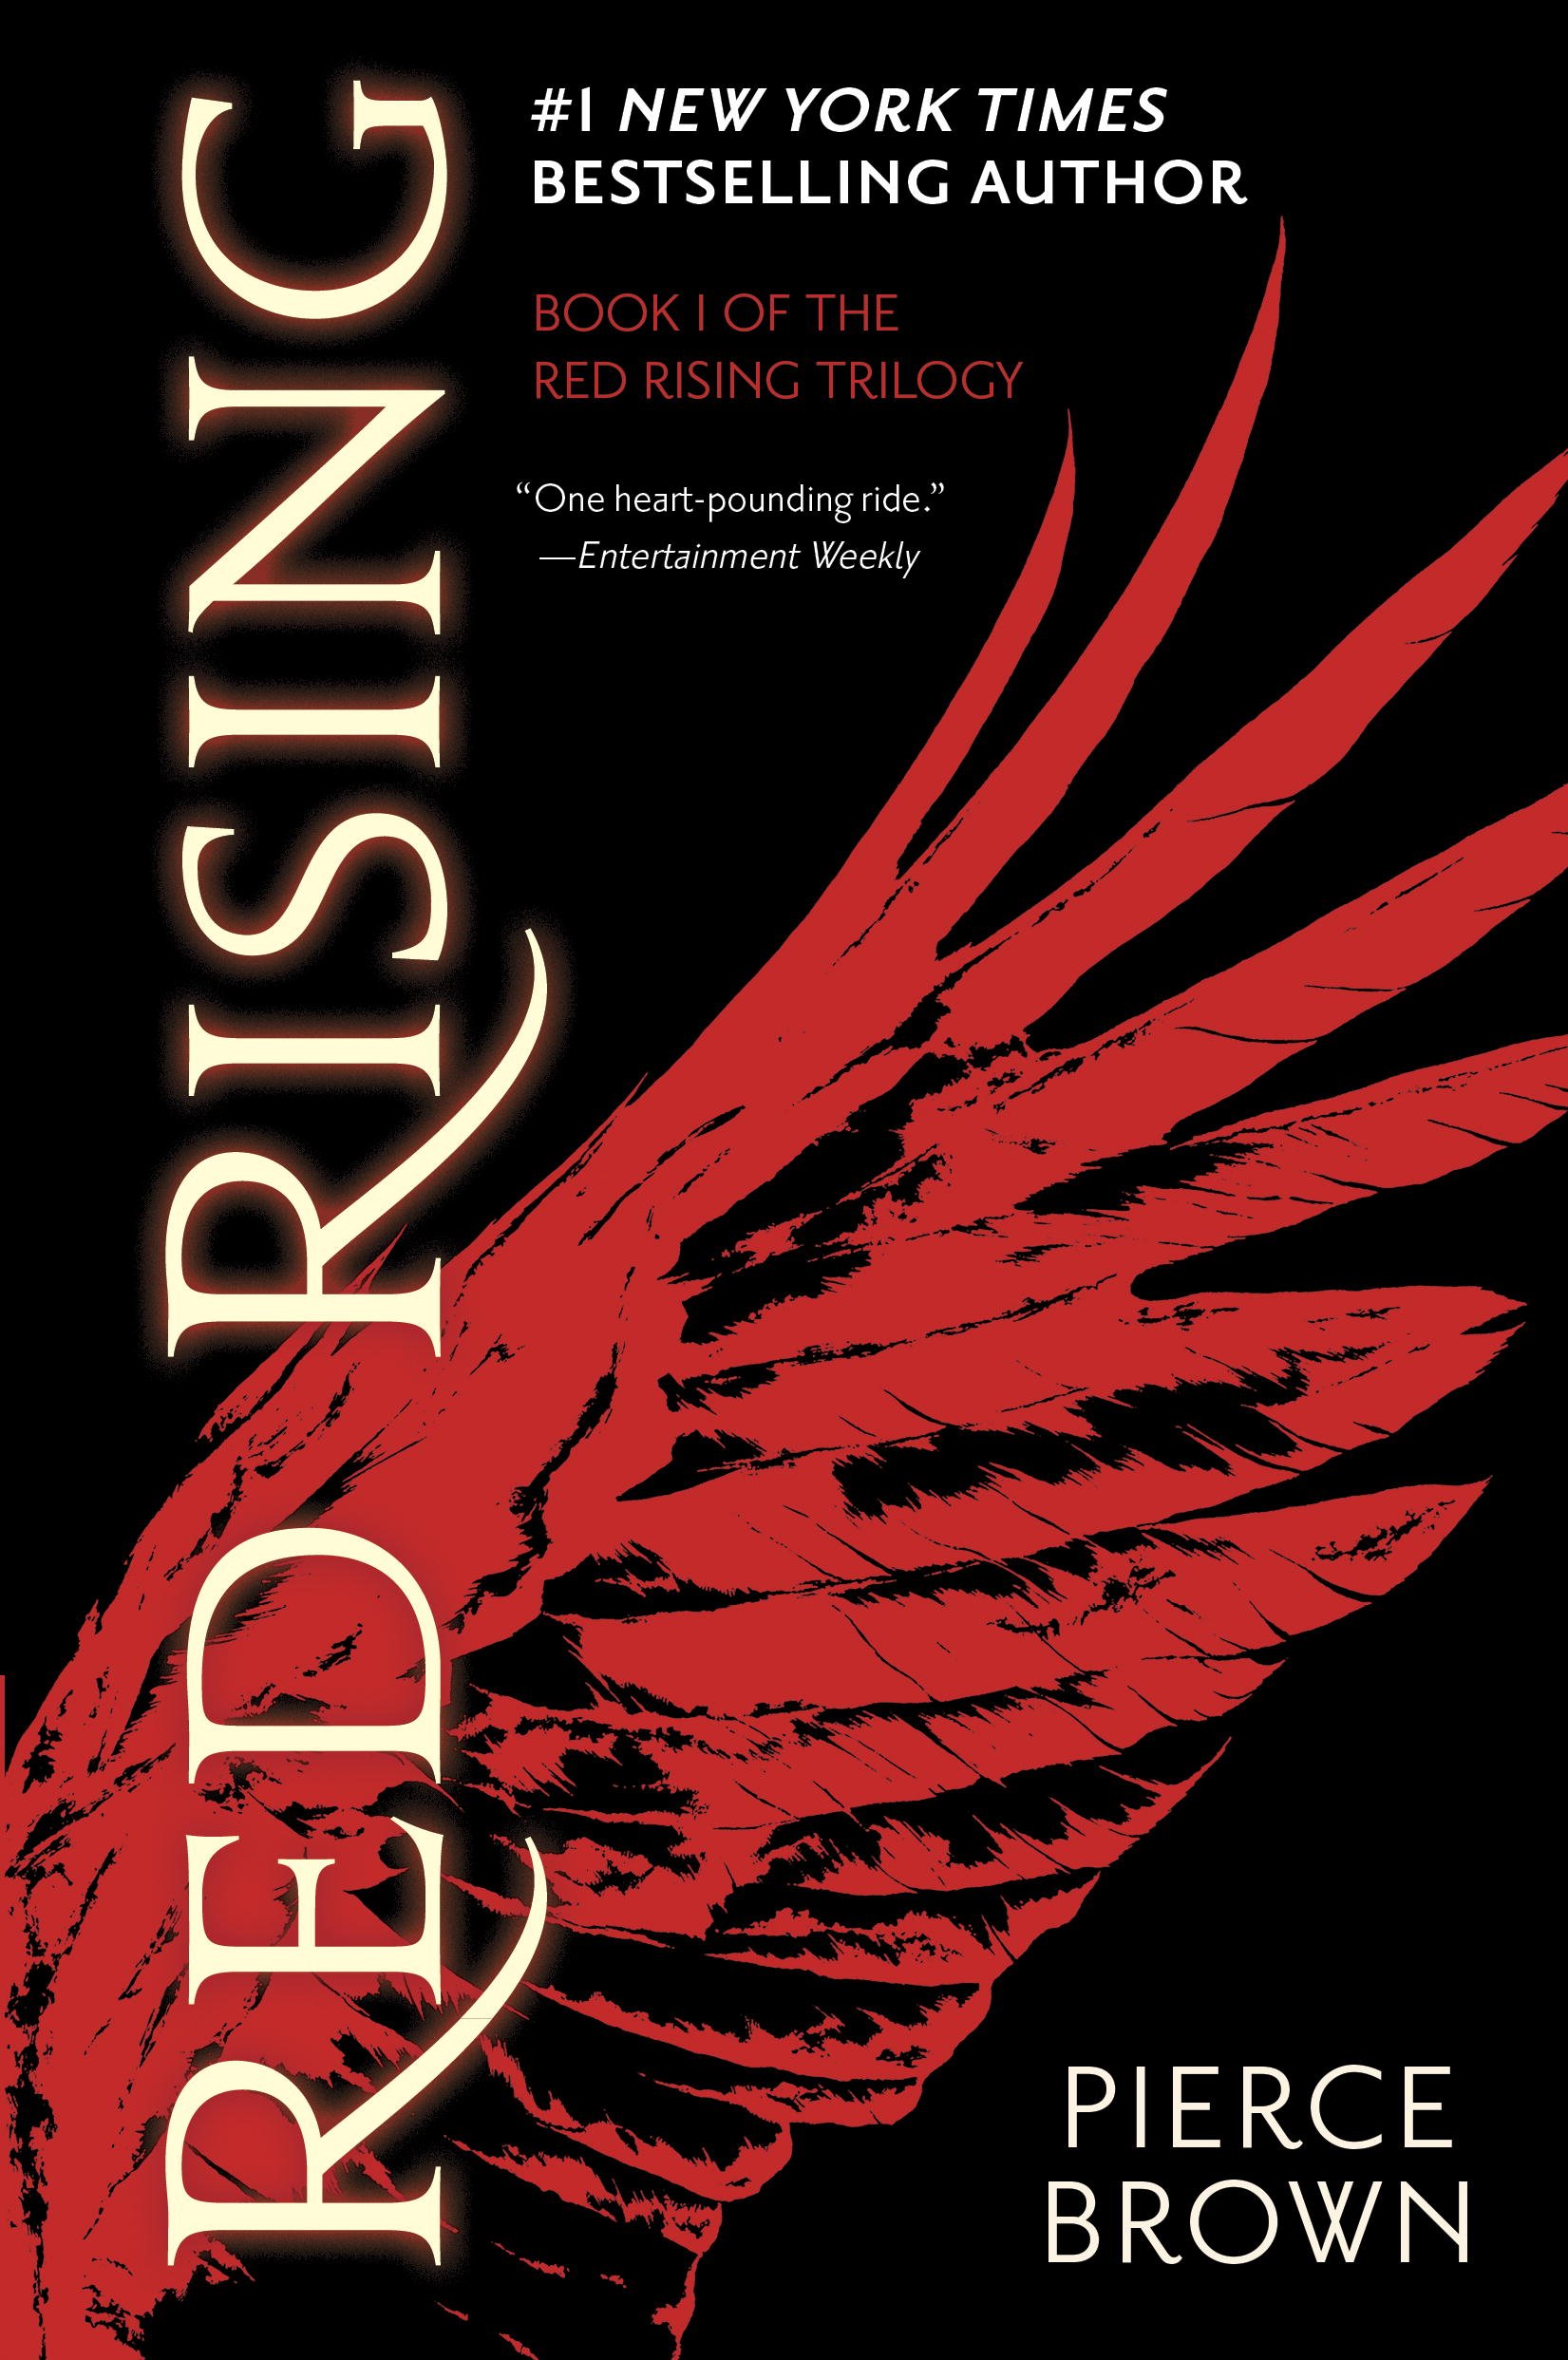 Red Rising Red Rising Series Book 1 eBook by Pierce Brown $1.99